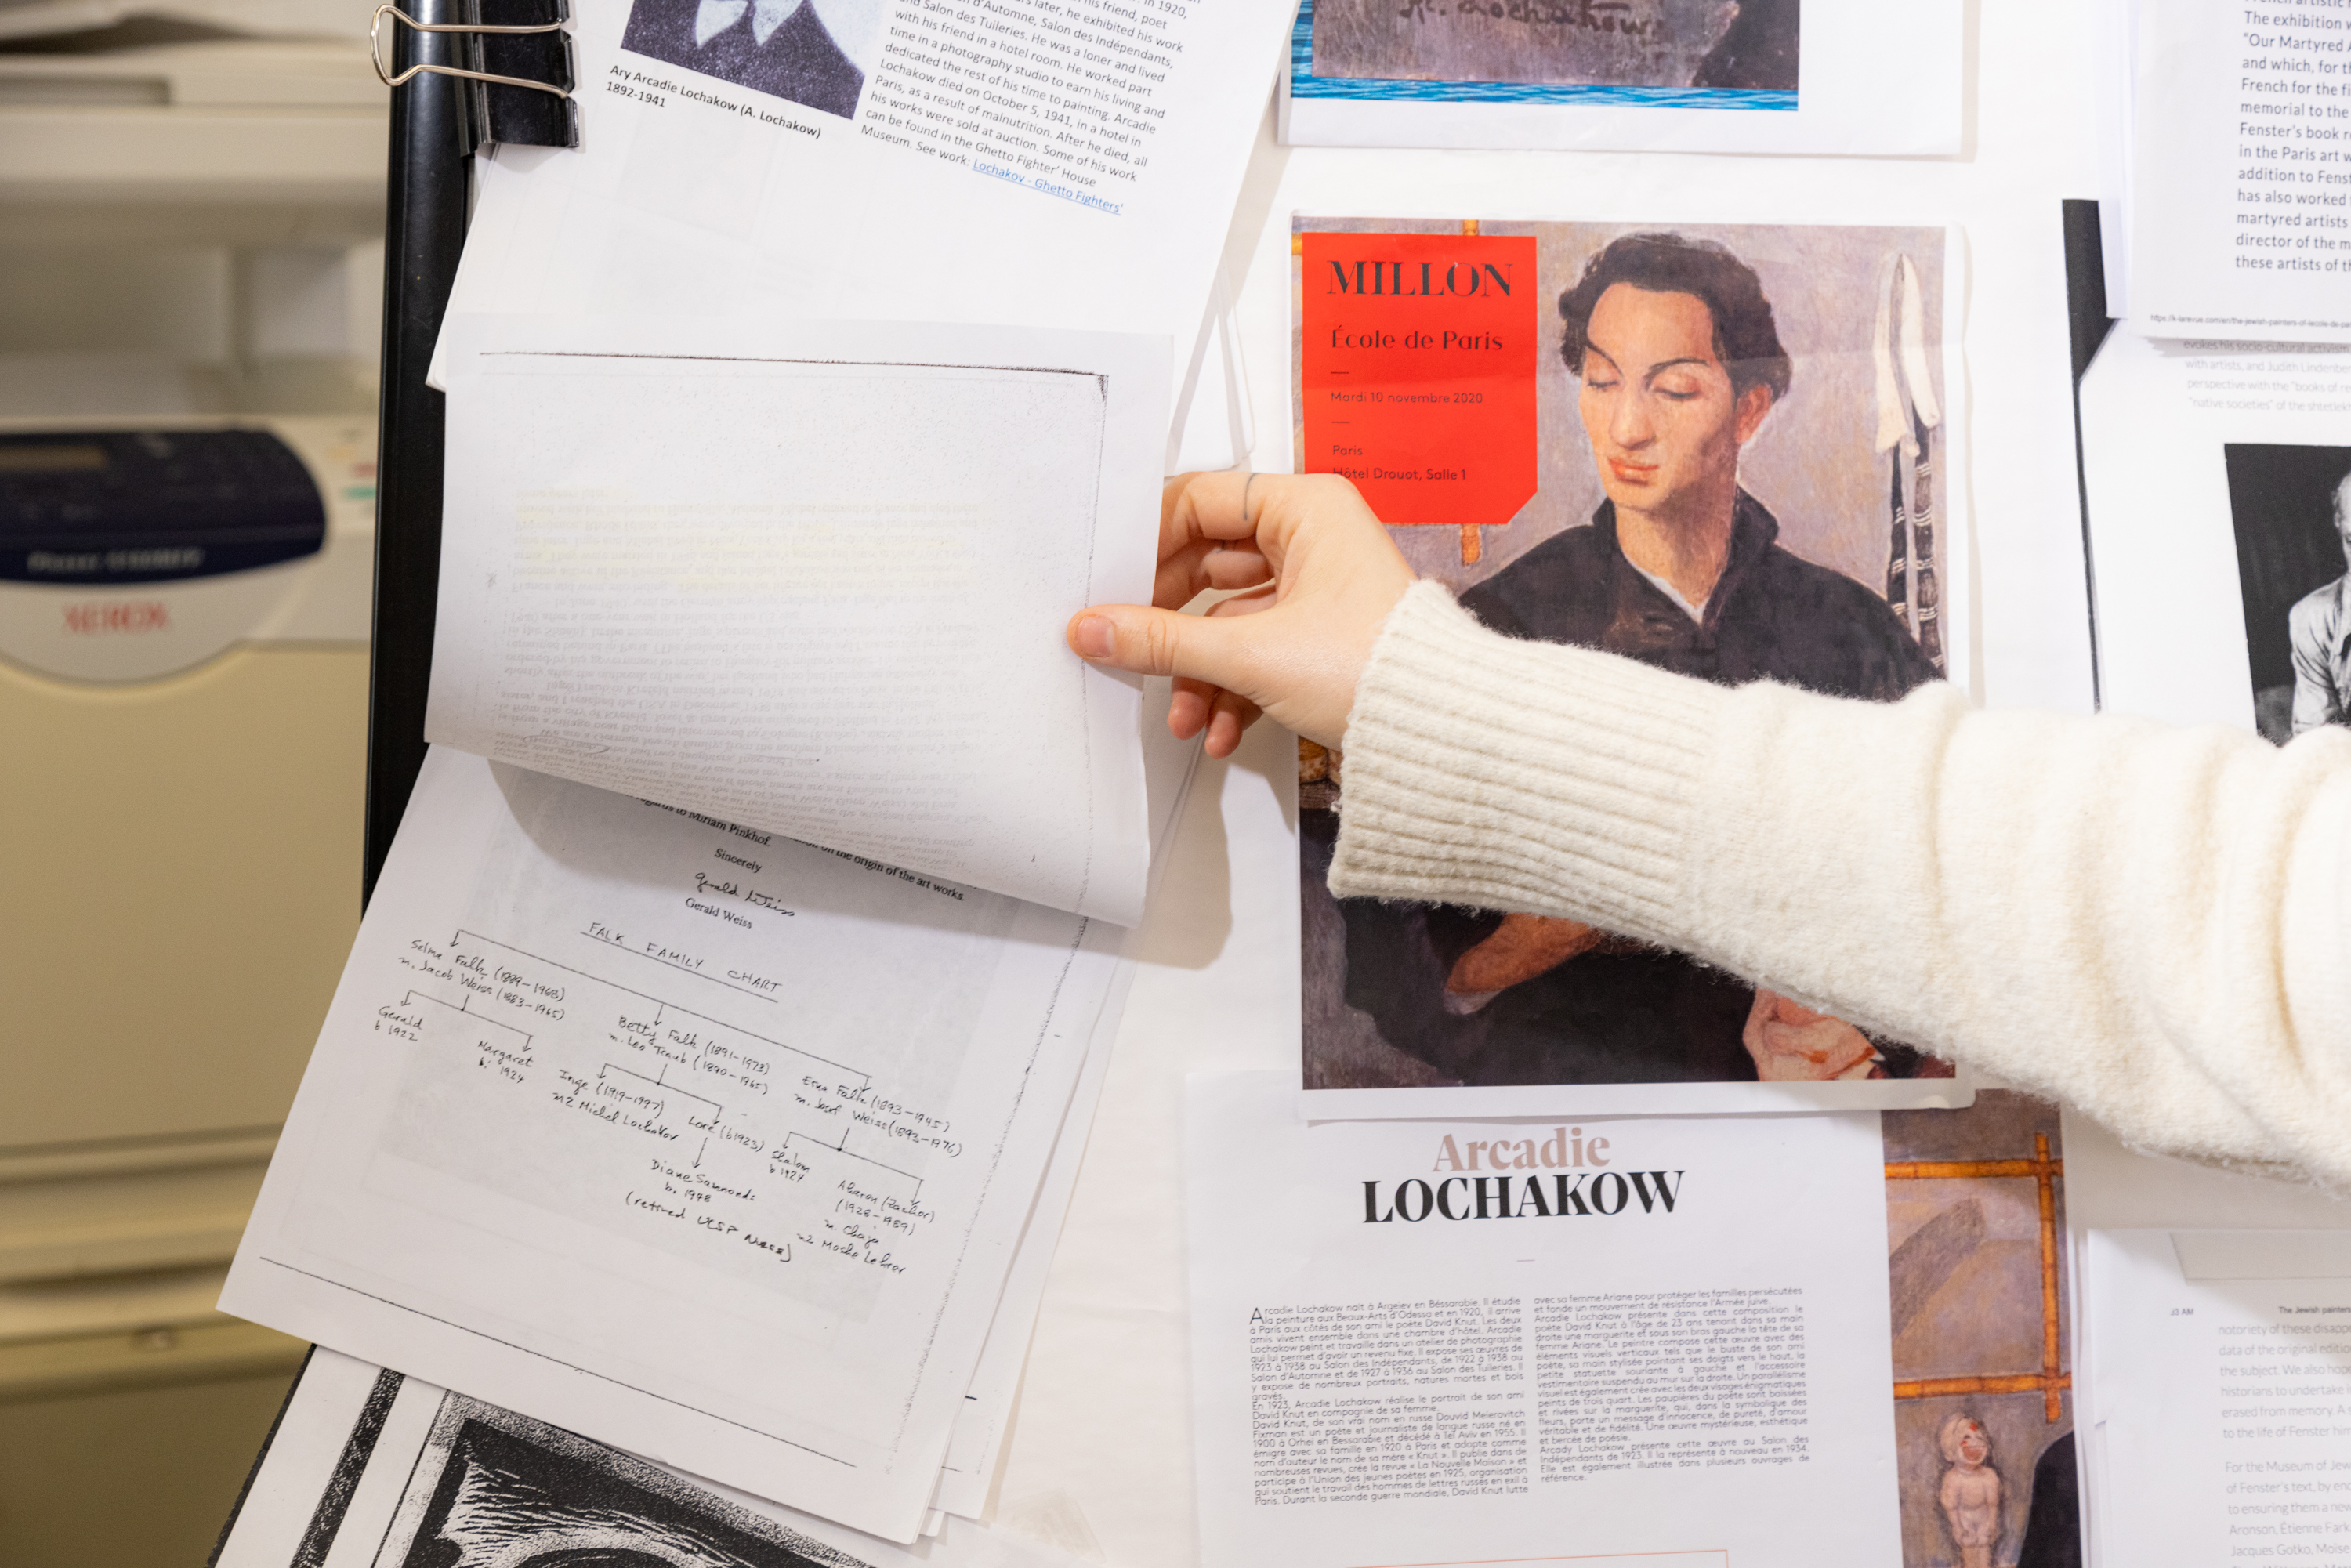 A hand flips through papers on a bulletin board with various articles, one featuring a painted portrait of a person.